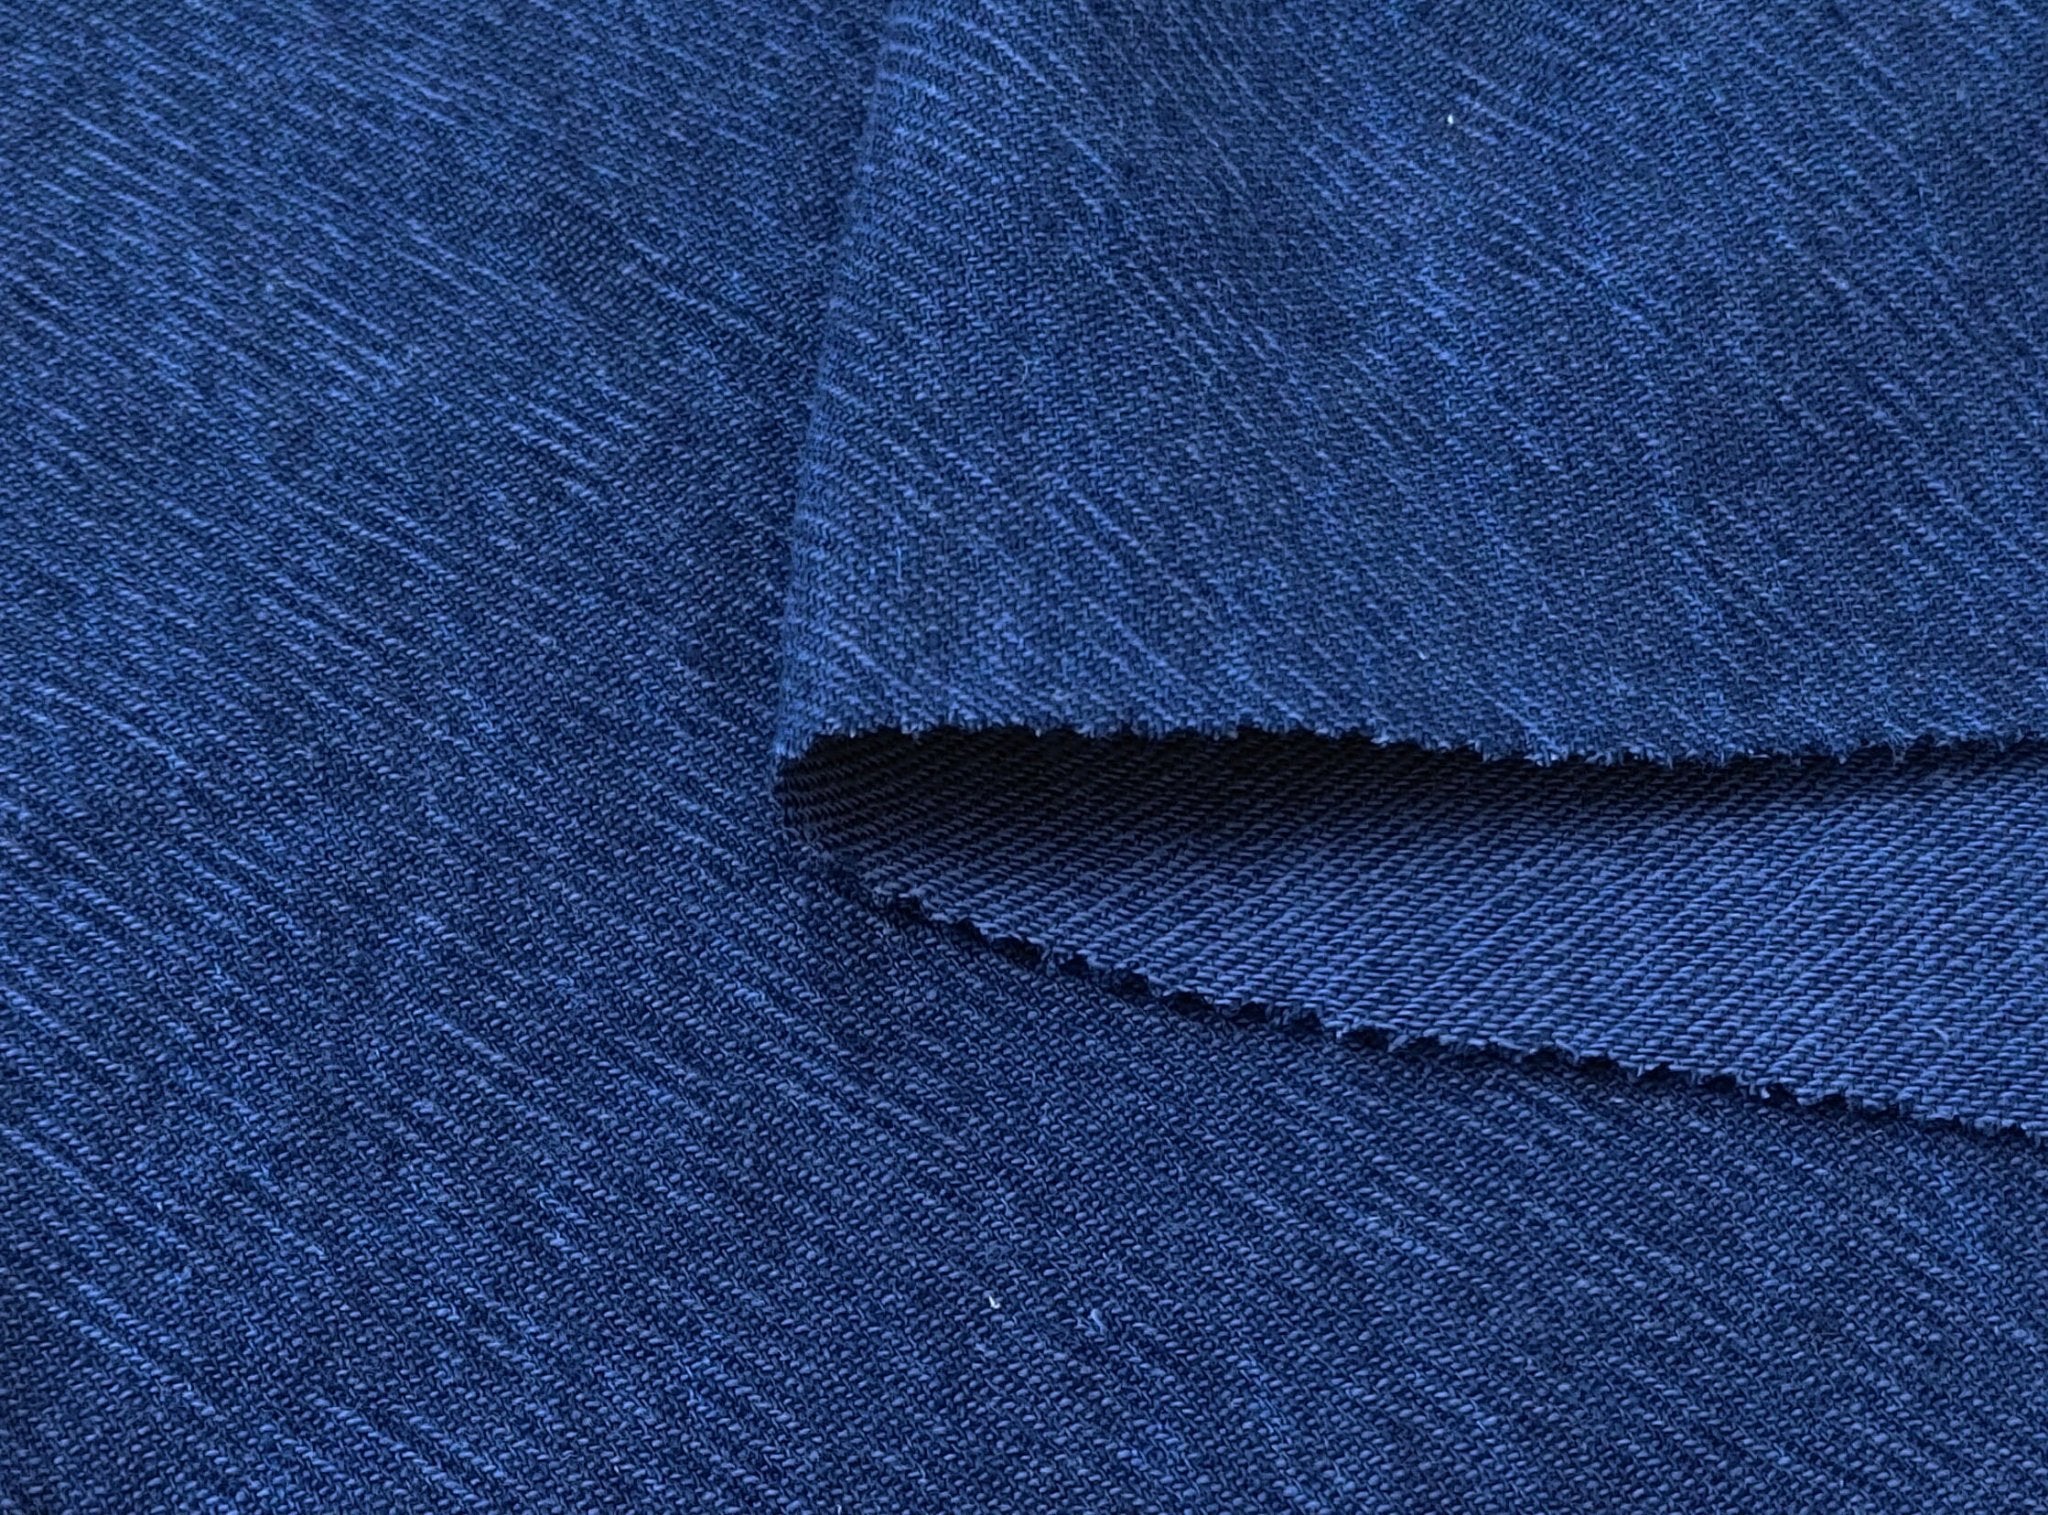 Heavyweight Linen Cotton Twill Fabric with Two-Tone Chambray 7258 7259 7331 7332 - The Linen Lab - Navy